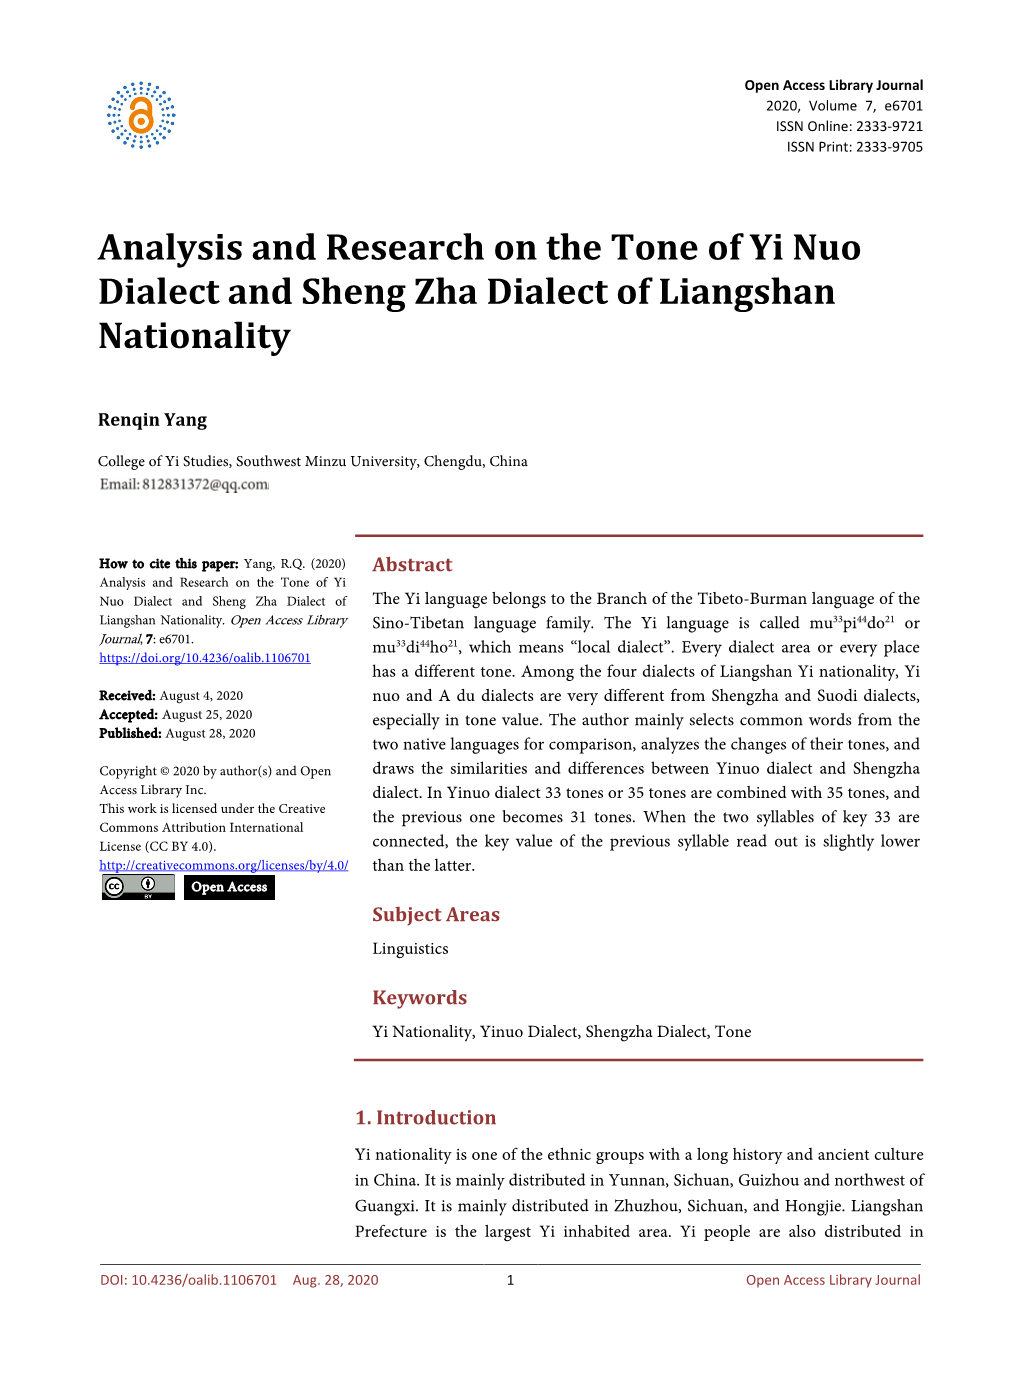 Analysis and Research on the Tone of Yi Nuo Dialect and Sheng Zha Dialect of Liangshan Nationality